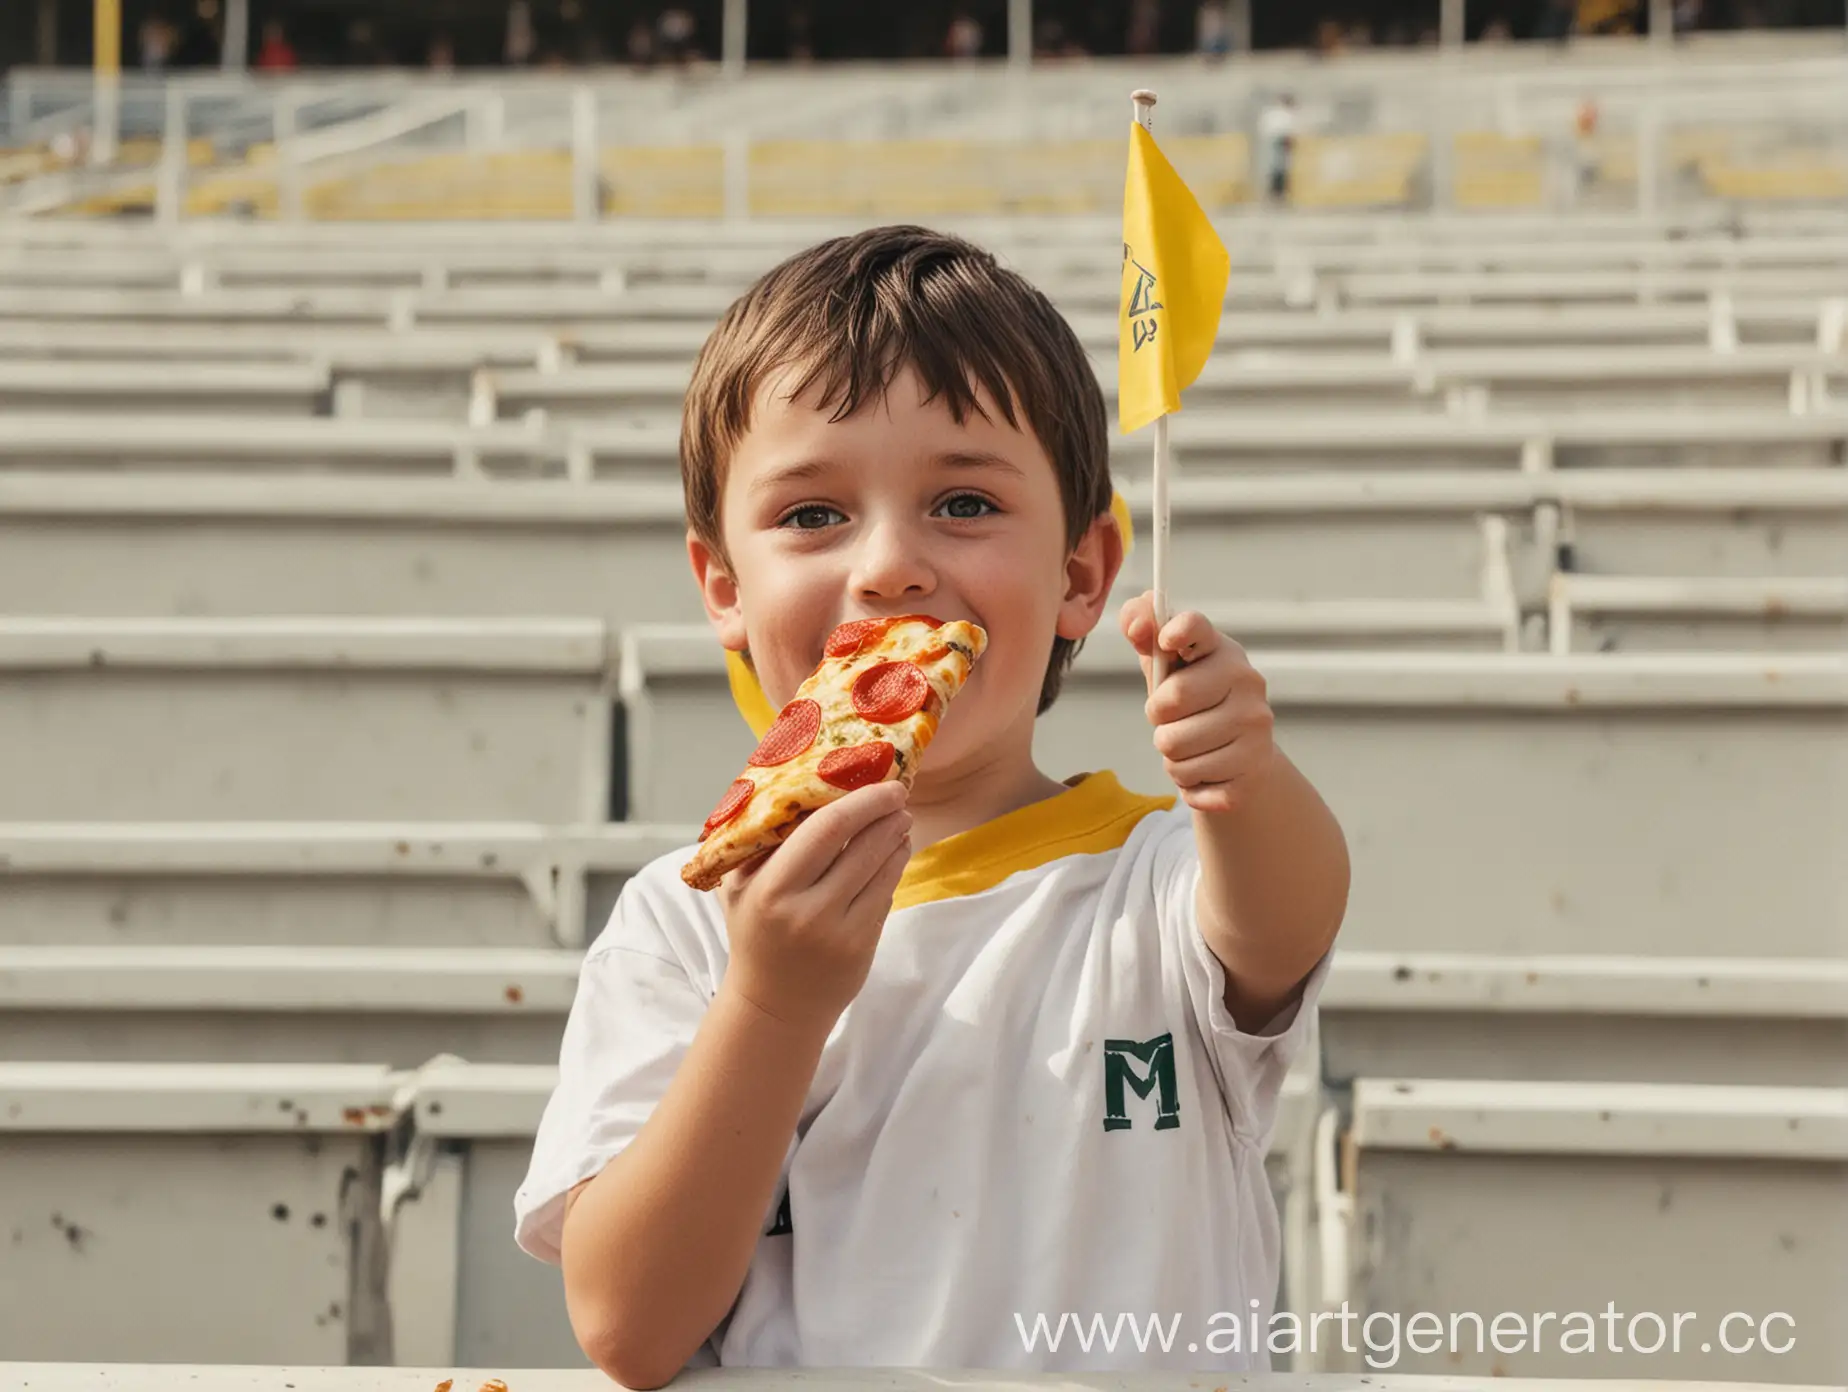 the kid in the bleachers with the one slice of pizza in hand. more colors. happy. hand up. white and yellow flags. normal eye